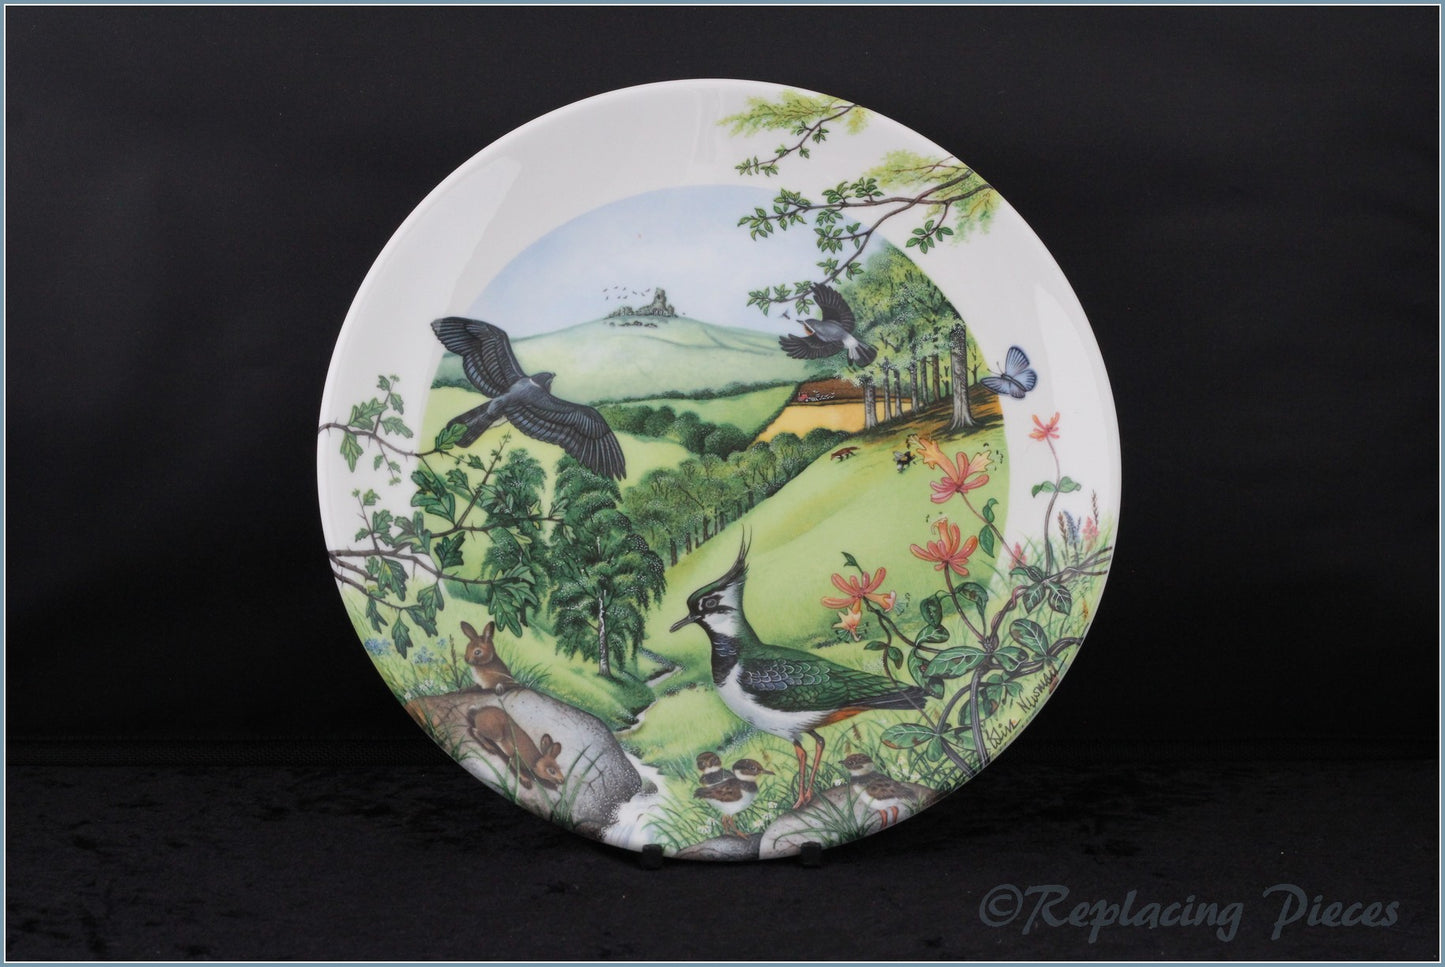 Wedgwood - Colin Newmans Country Panorama - Rolling Hills & Grasslands